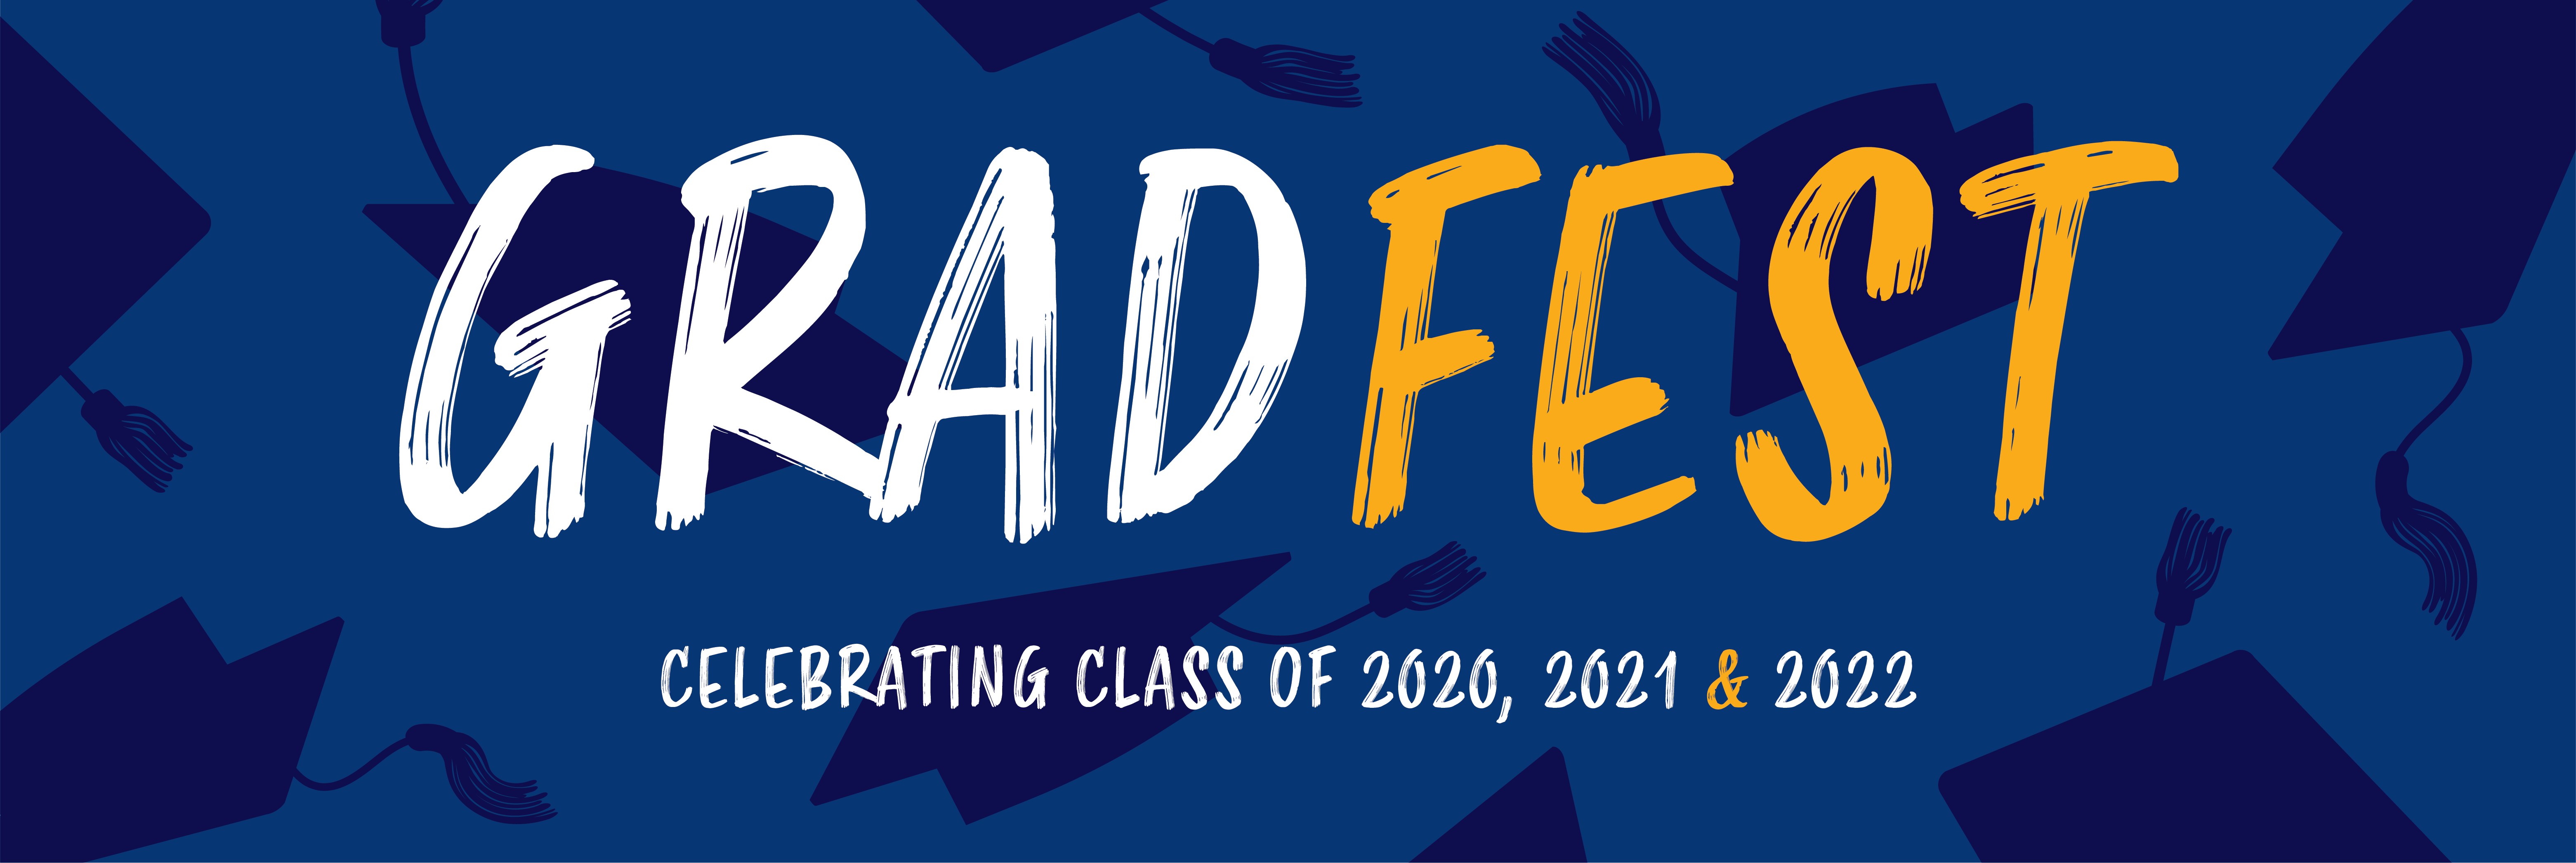 Gradfest graphic, celebrating classes of 2020, 2021, and 2022.